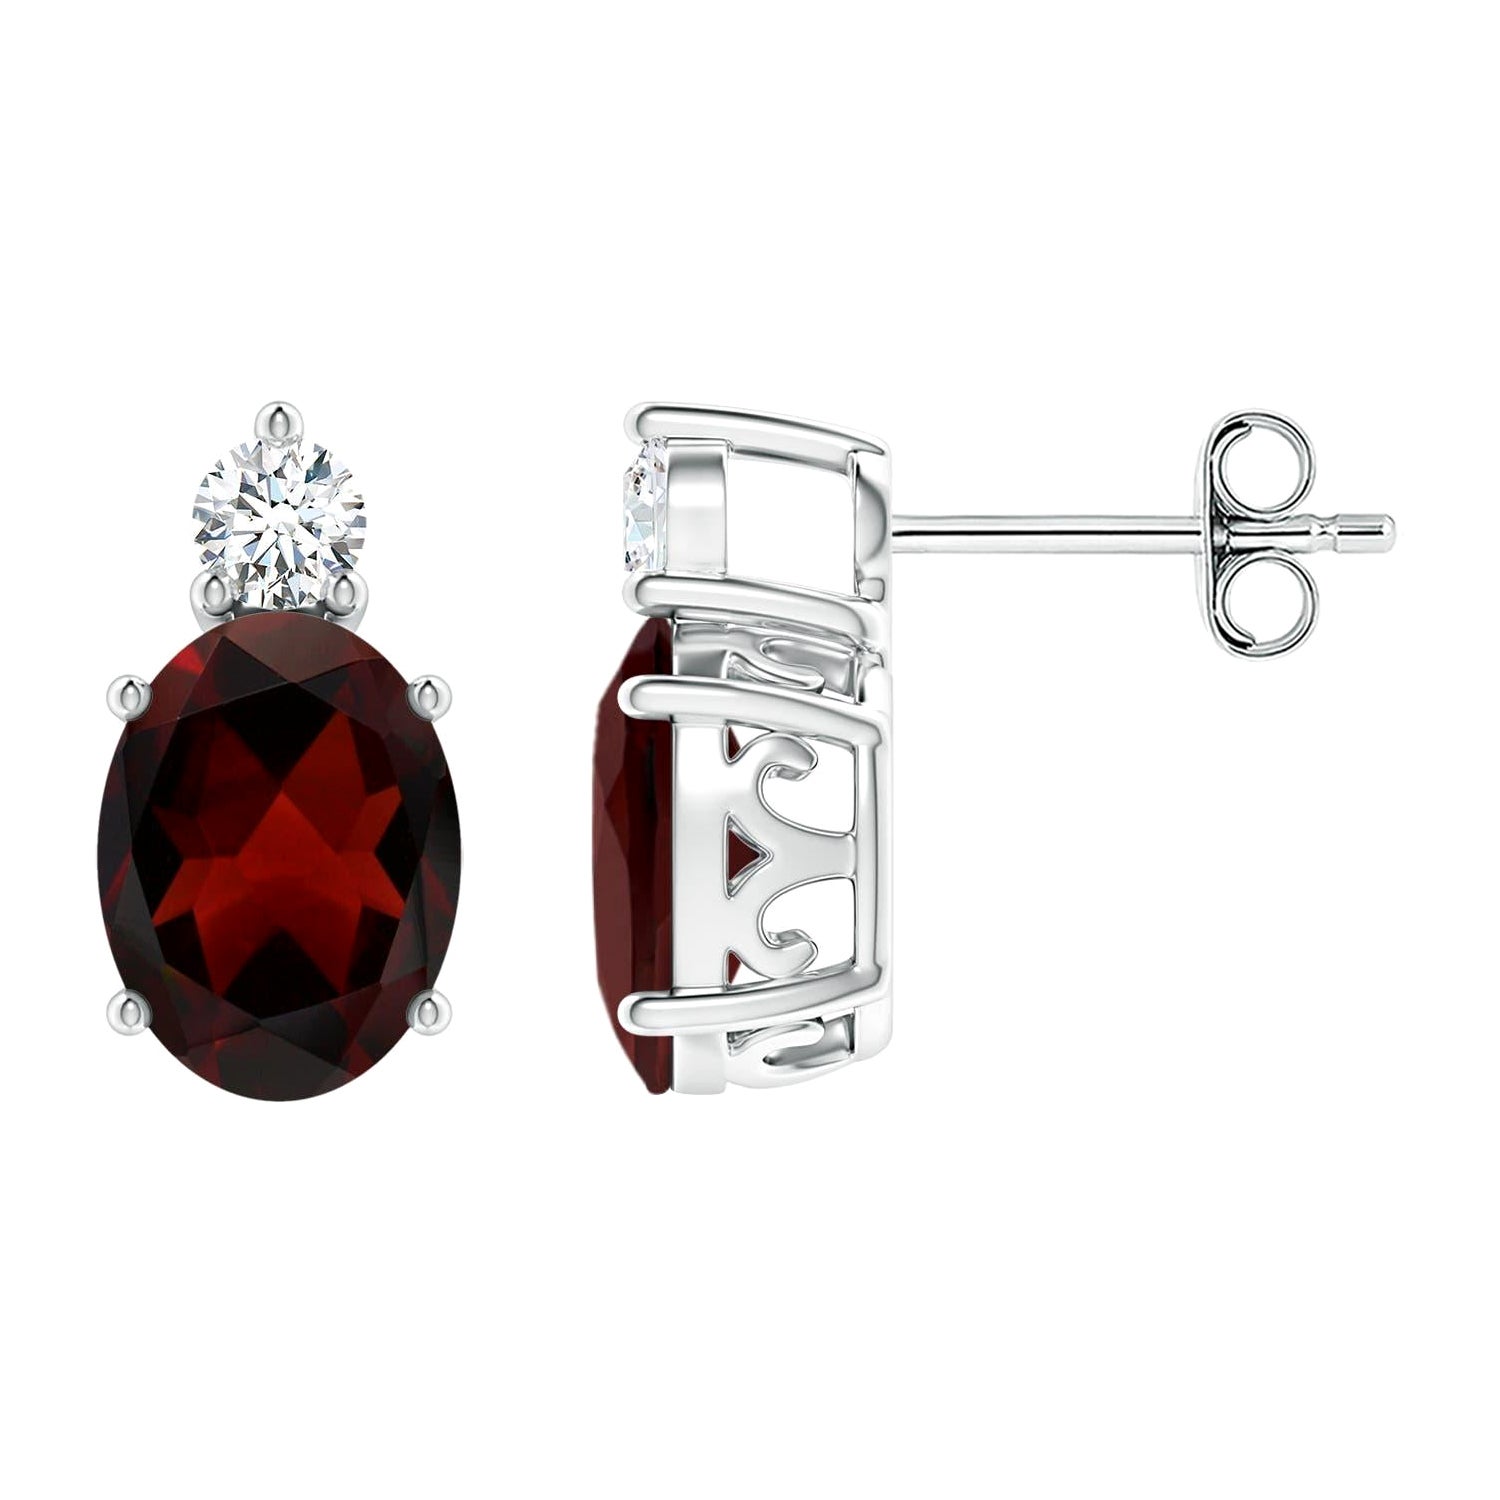 Natural Oval 2.9ct Garnet Stud Earrings with Diamond in 925 Sterling Silver